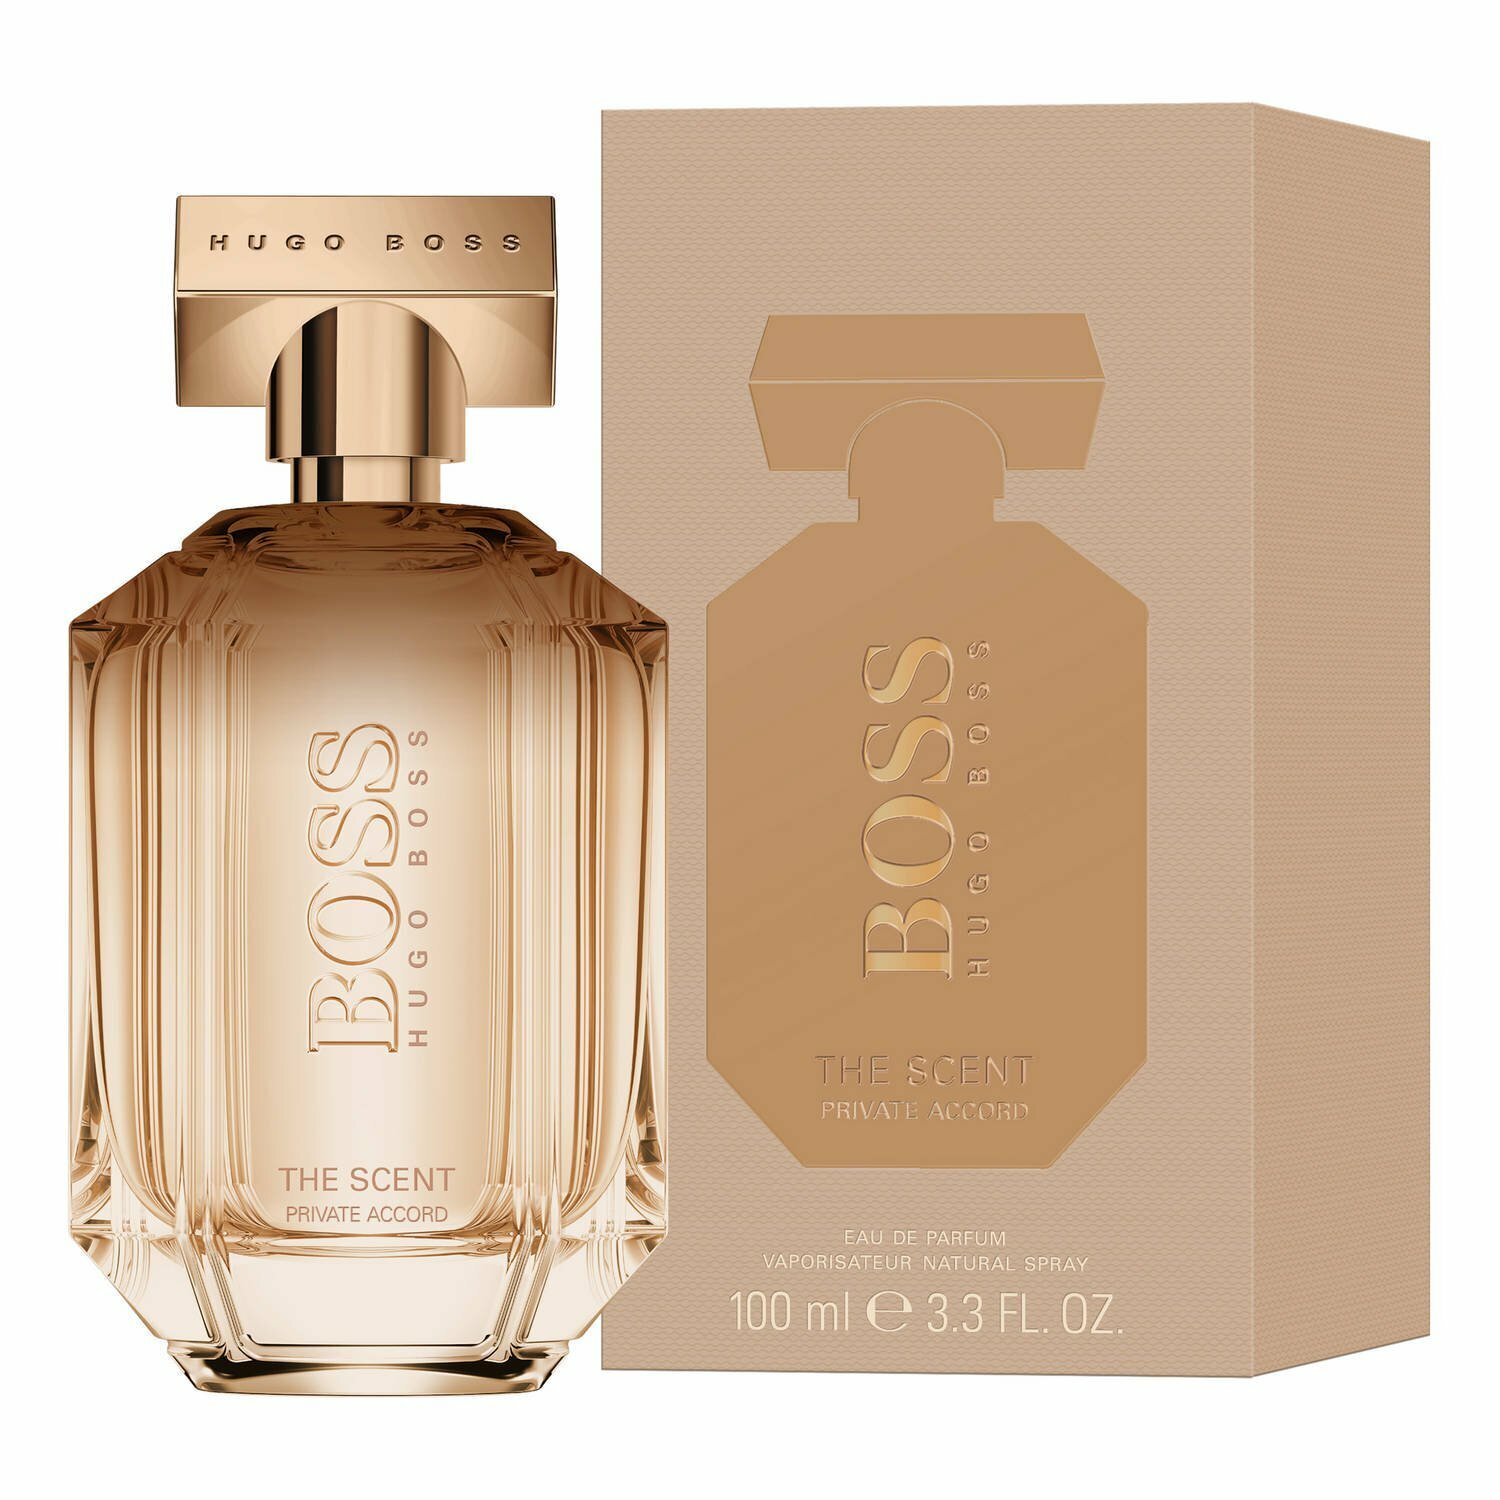 HUGO BOSS Boss The Scent Private Accord for Her парфюмерная вода 100 мл для женщин